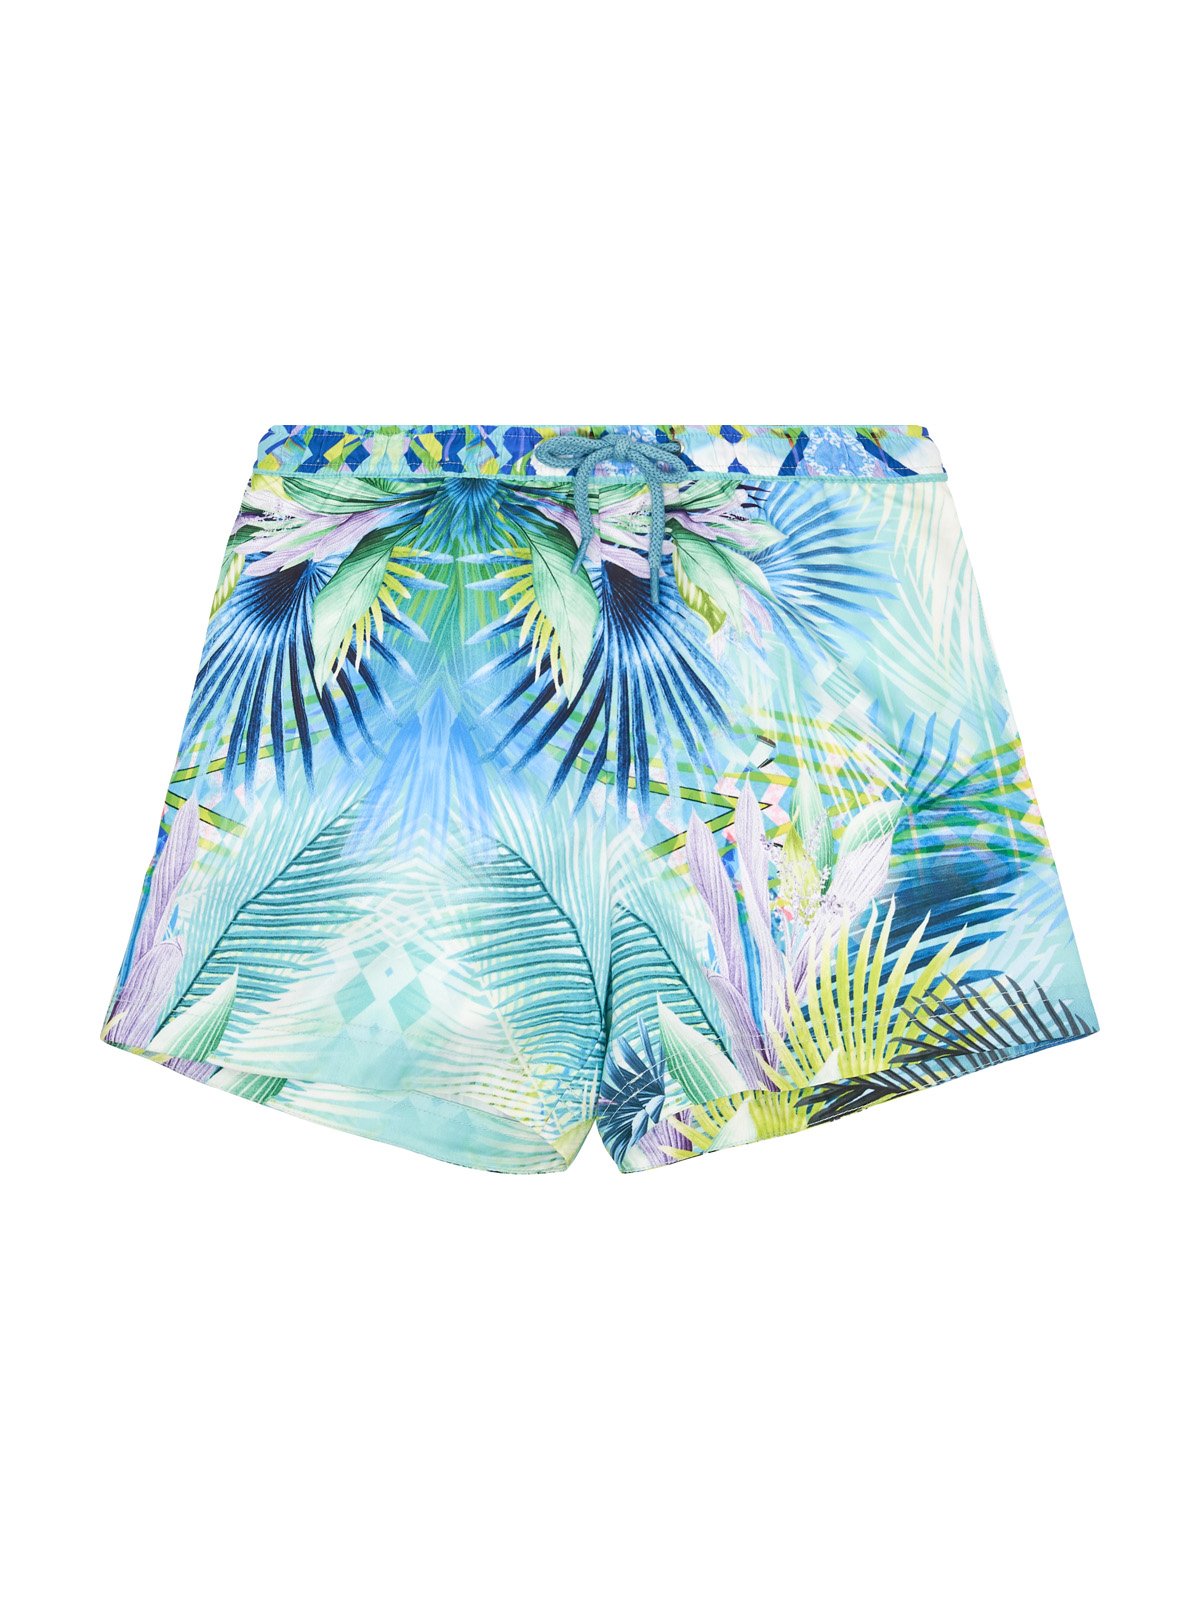 BOYS BOARDSHORT WHATS YOUR VICE